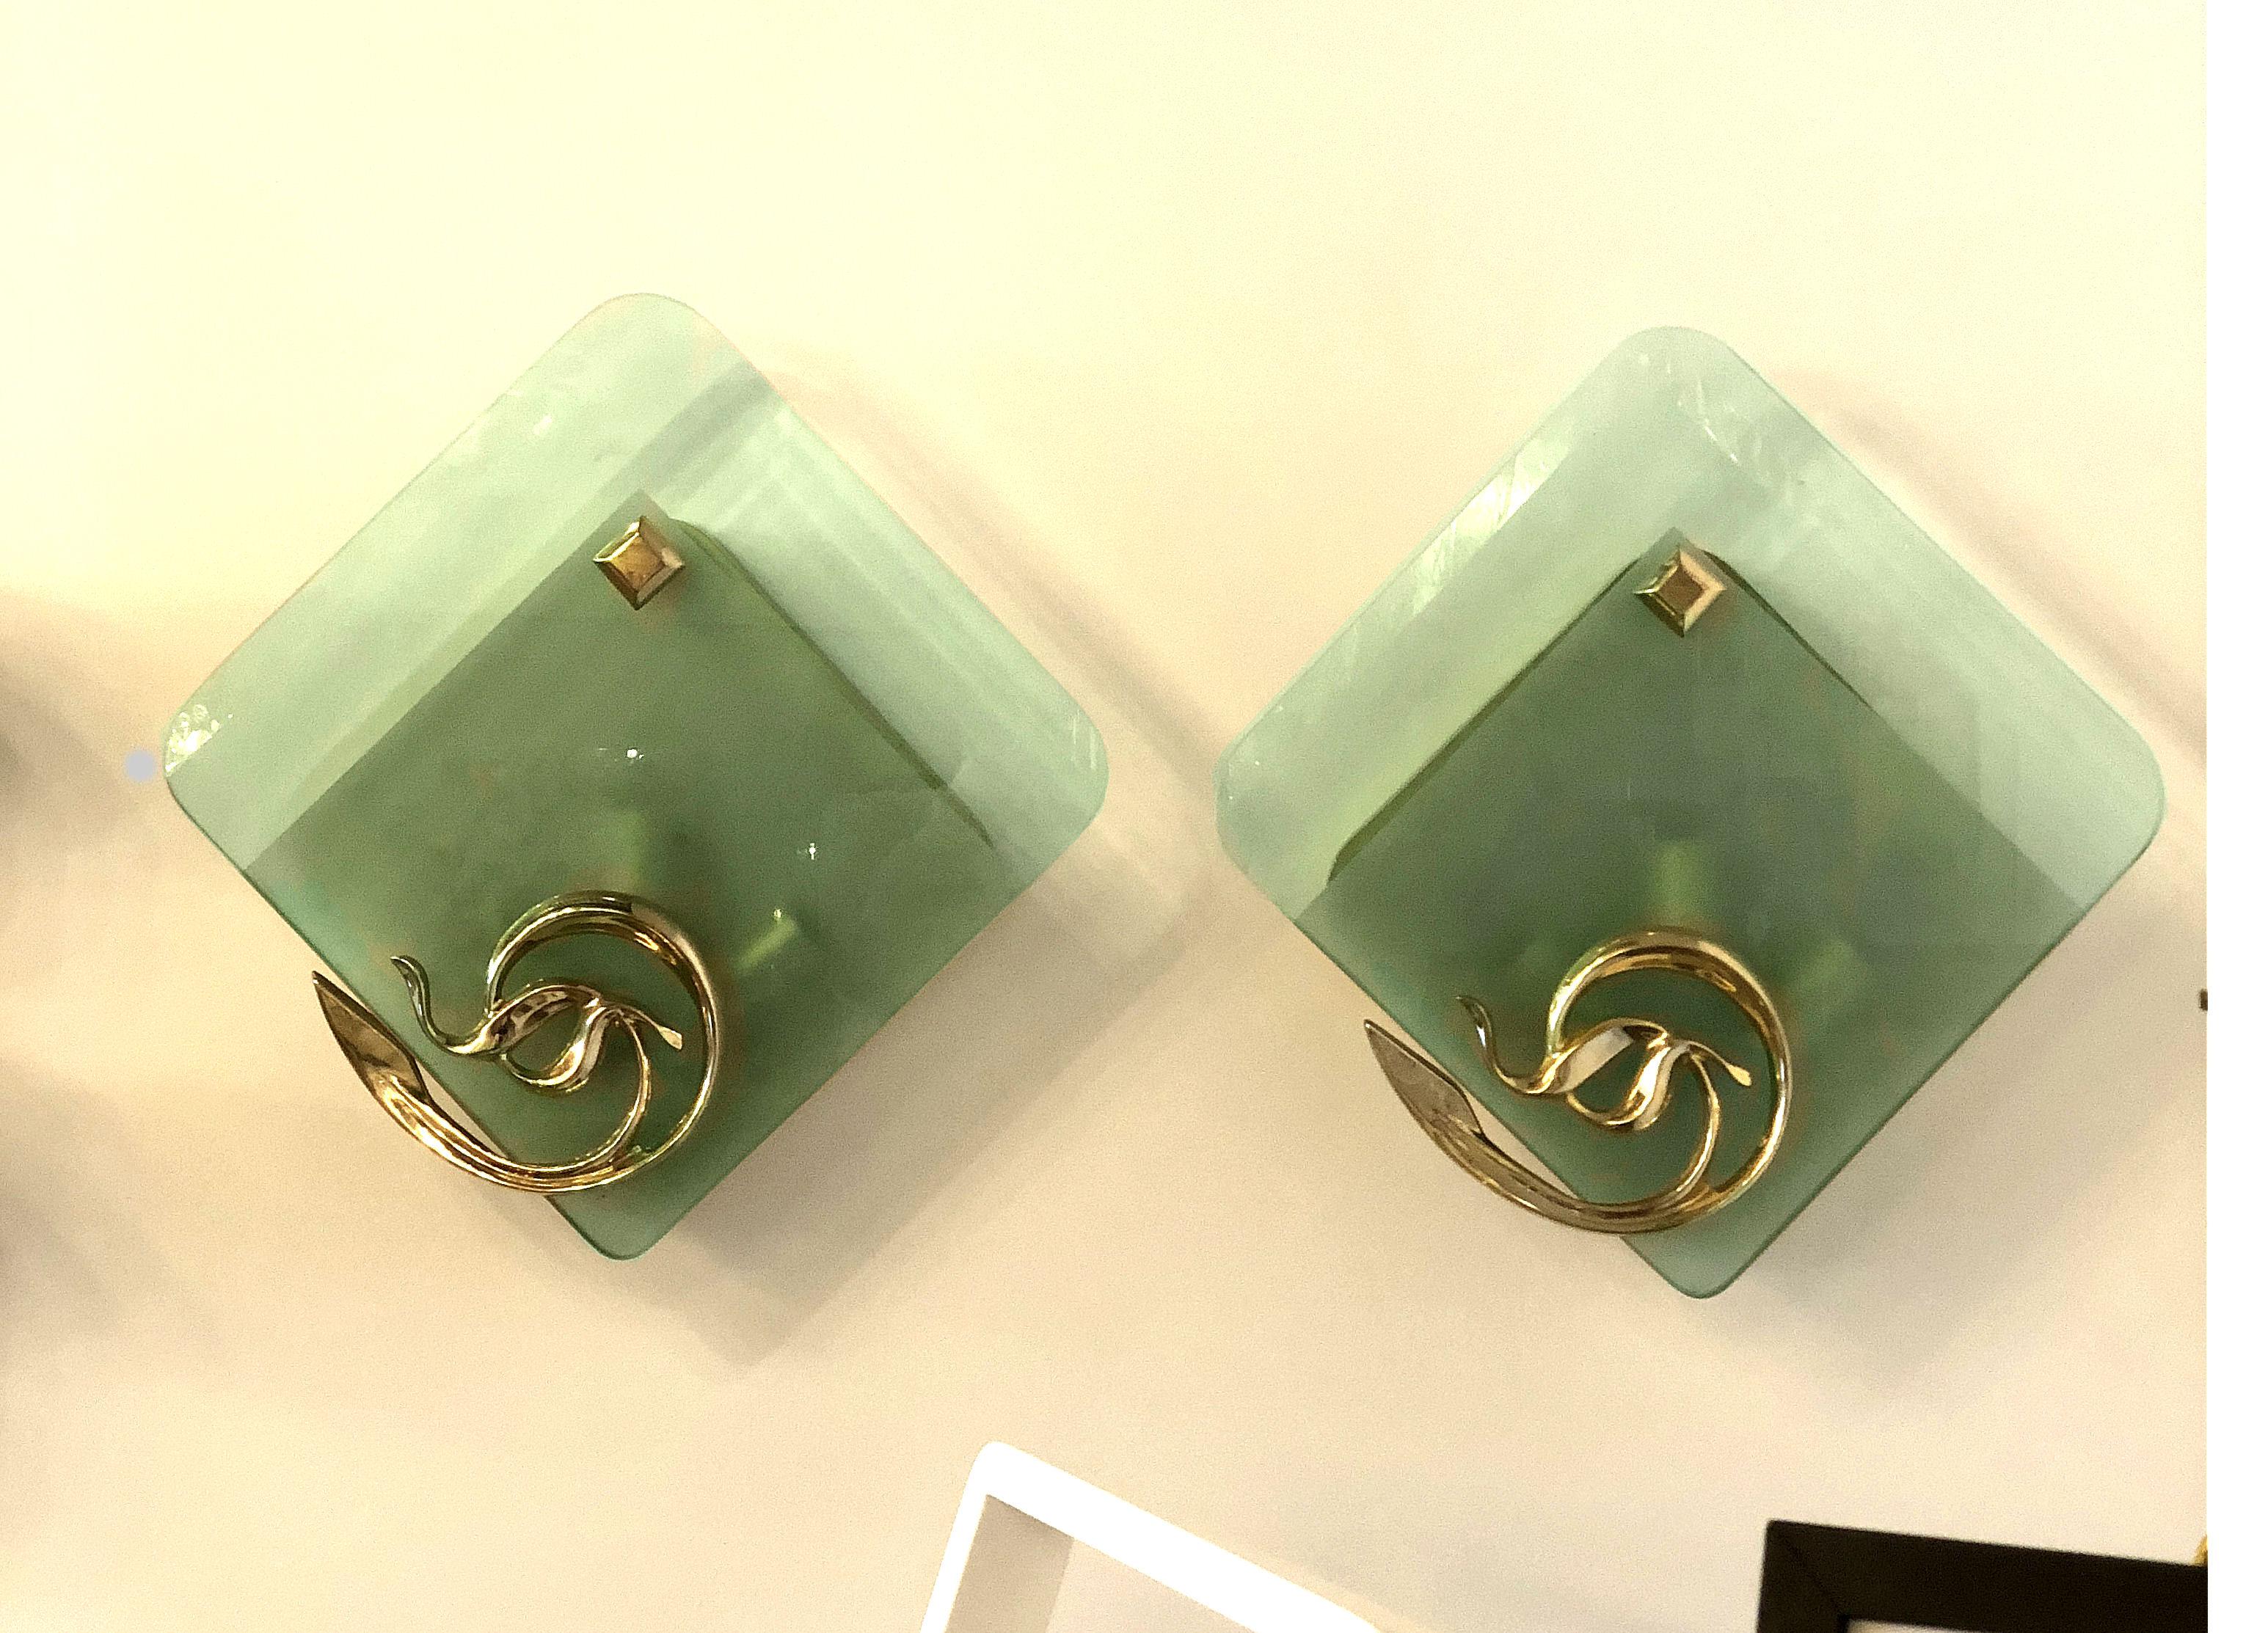 Pair of Italian, Mid-Century Modern sconces, or flush mounts, attributed to Fontana Arte, circa 1960.
Made of cast brass mounts and ornaments, and a large thick green glass square, partly frosted, hiding 3 lights each.
Beautiful quality &